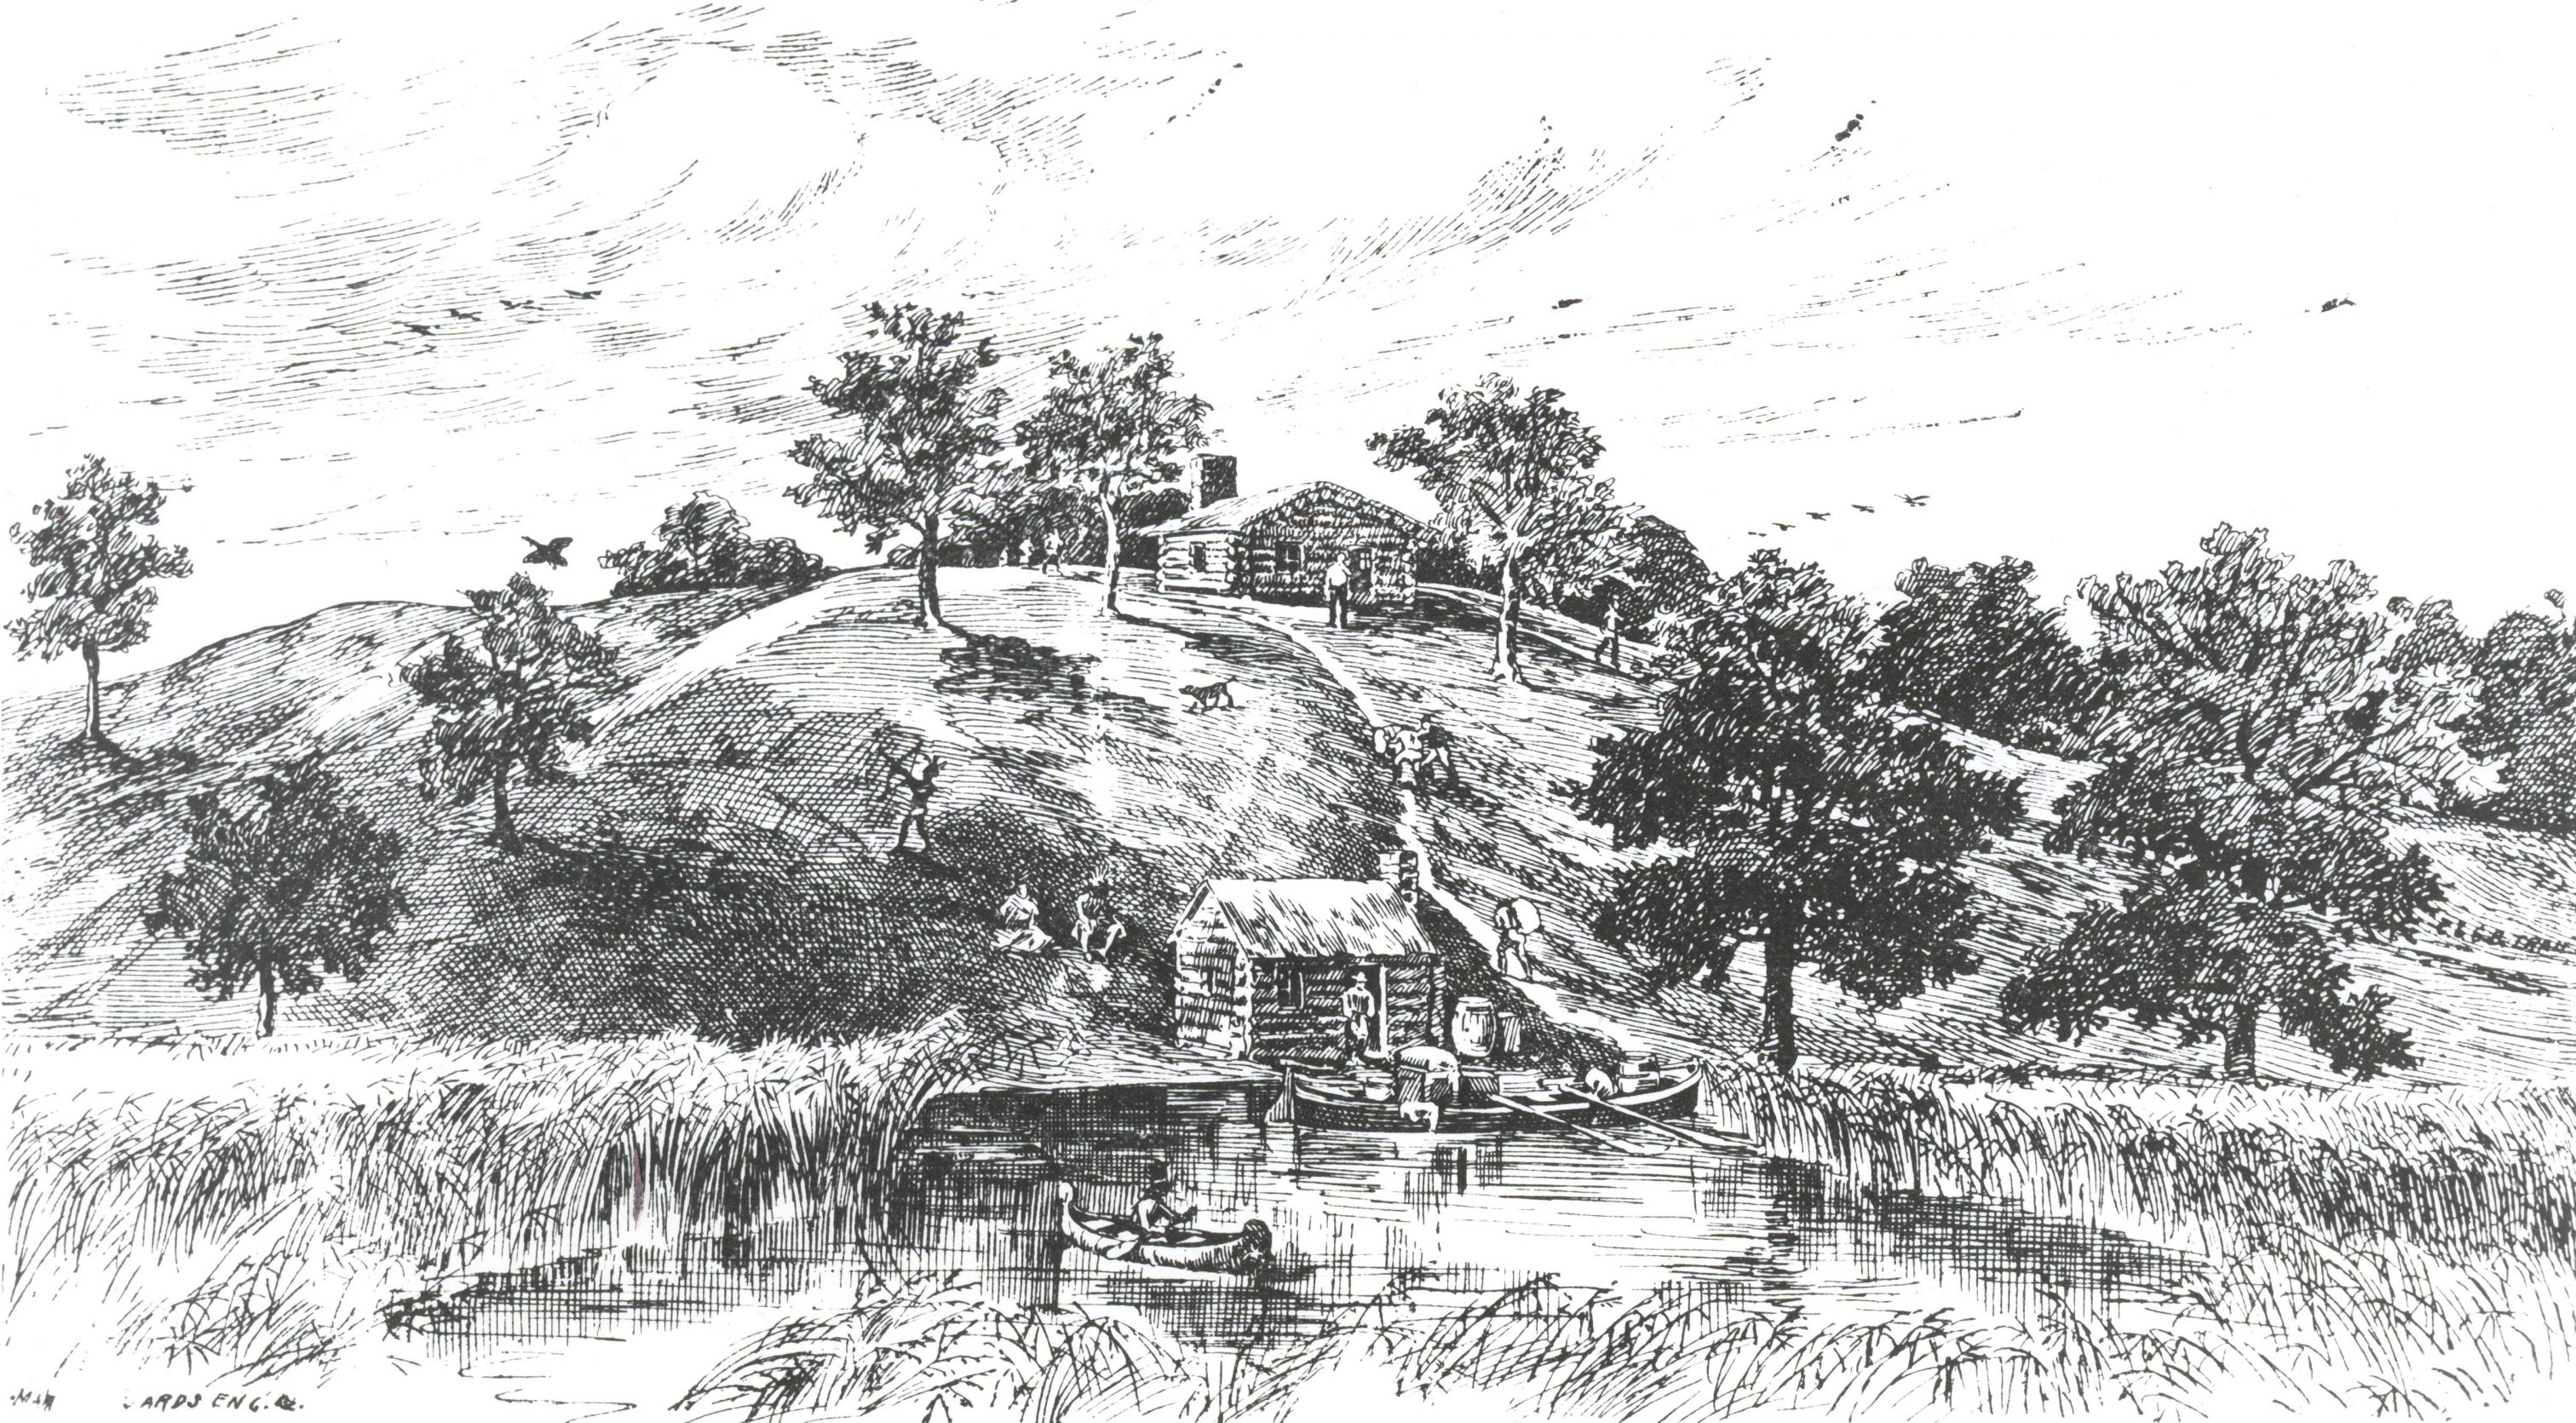 Illustration of Jacques Vieau's cabin outpost. Vieau was Milwaukee's first permanent fur trading agent. 